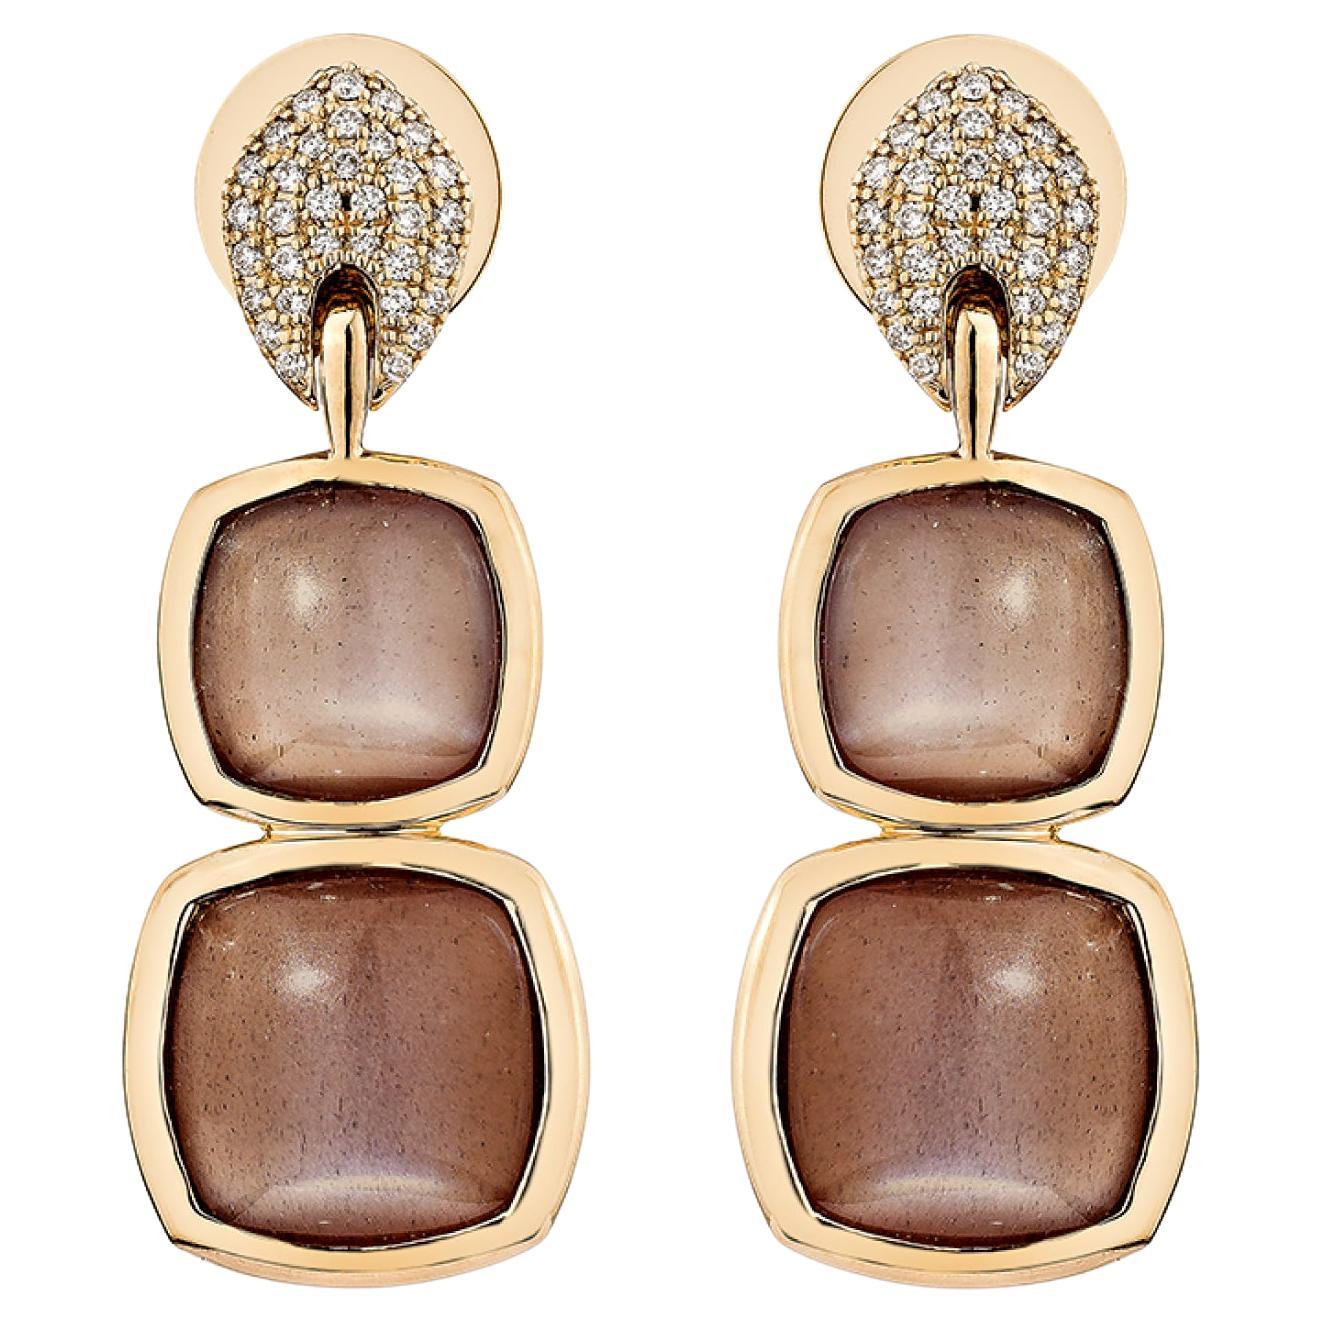 20.086 Carat Chocolate Moonstone Drop Earring in 18KRG With White Diamond. For Sale